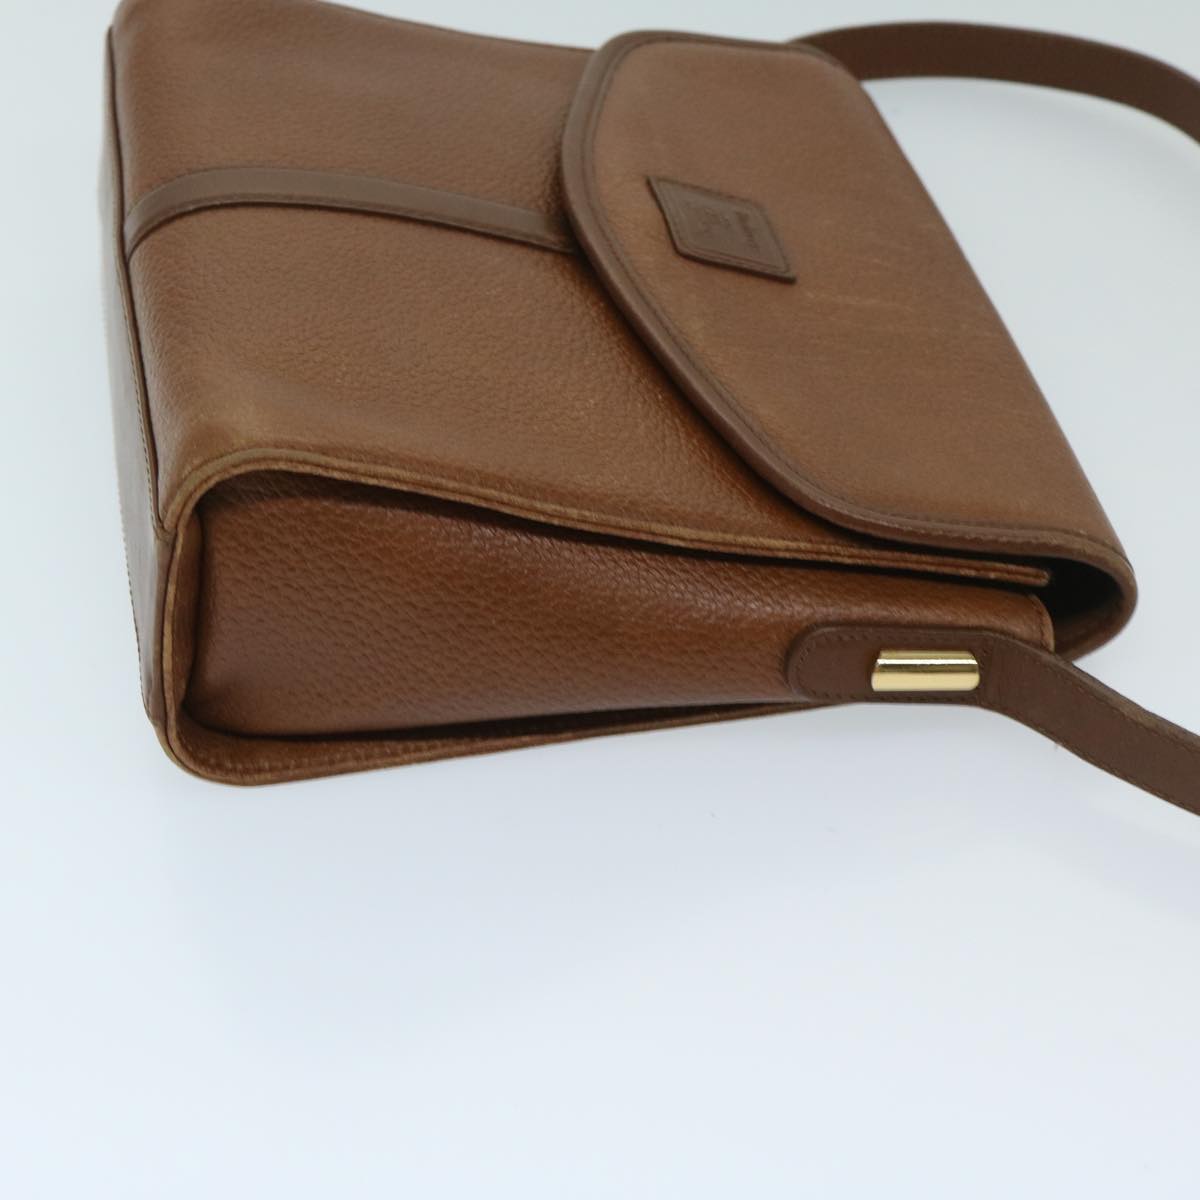 Burberrys Shoulder Bag Leather Brown Auth ac2838